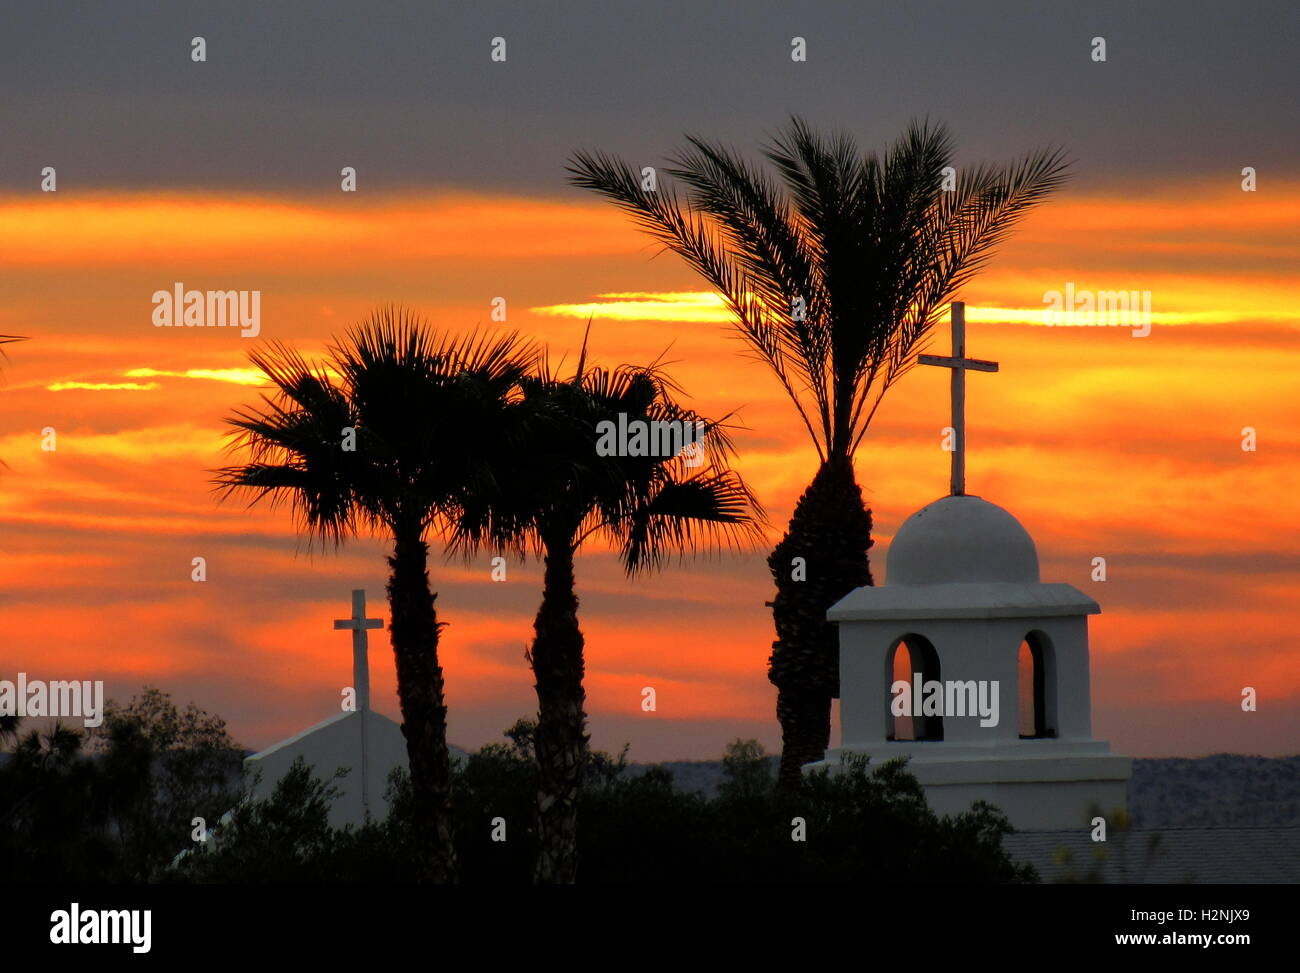 Palm tree next to church with two crosses at gold, orange, pink sunrise in Anza-Borrego Desert Stock Photo